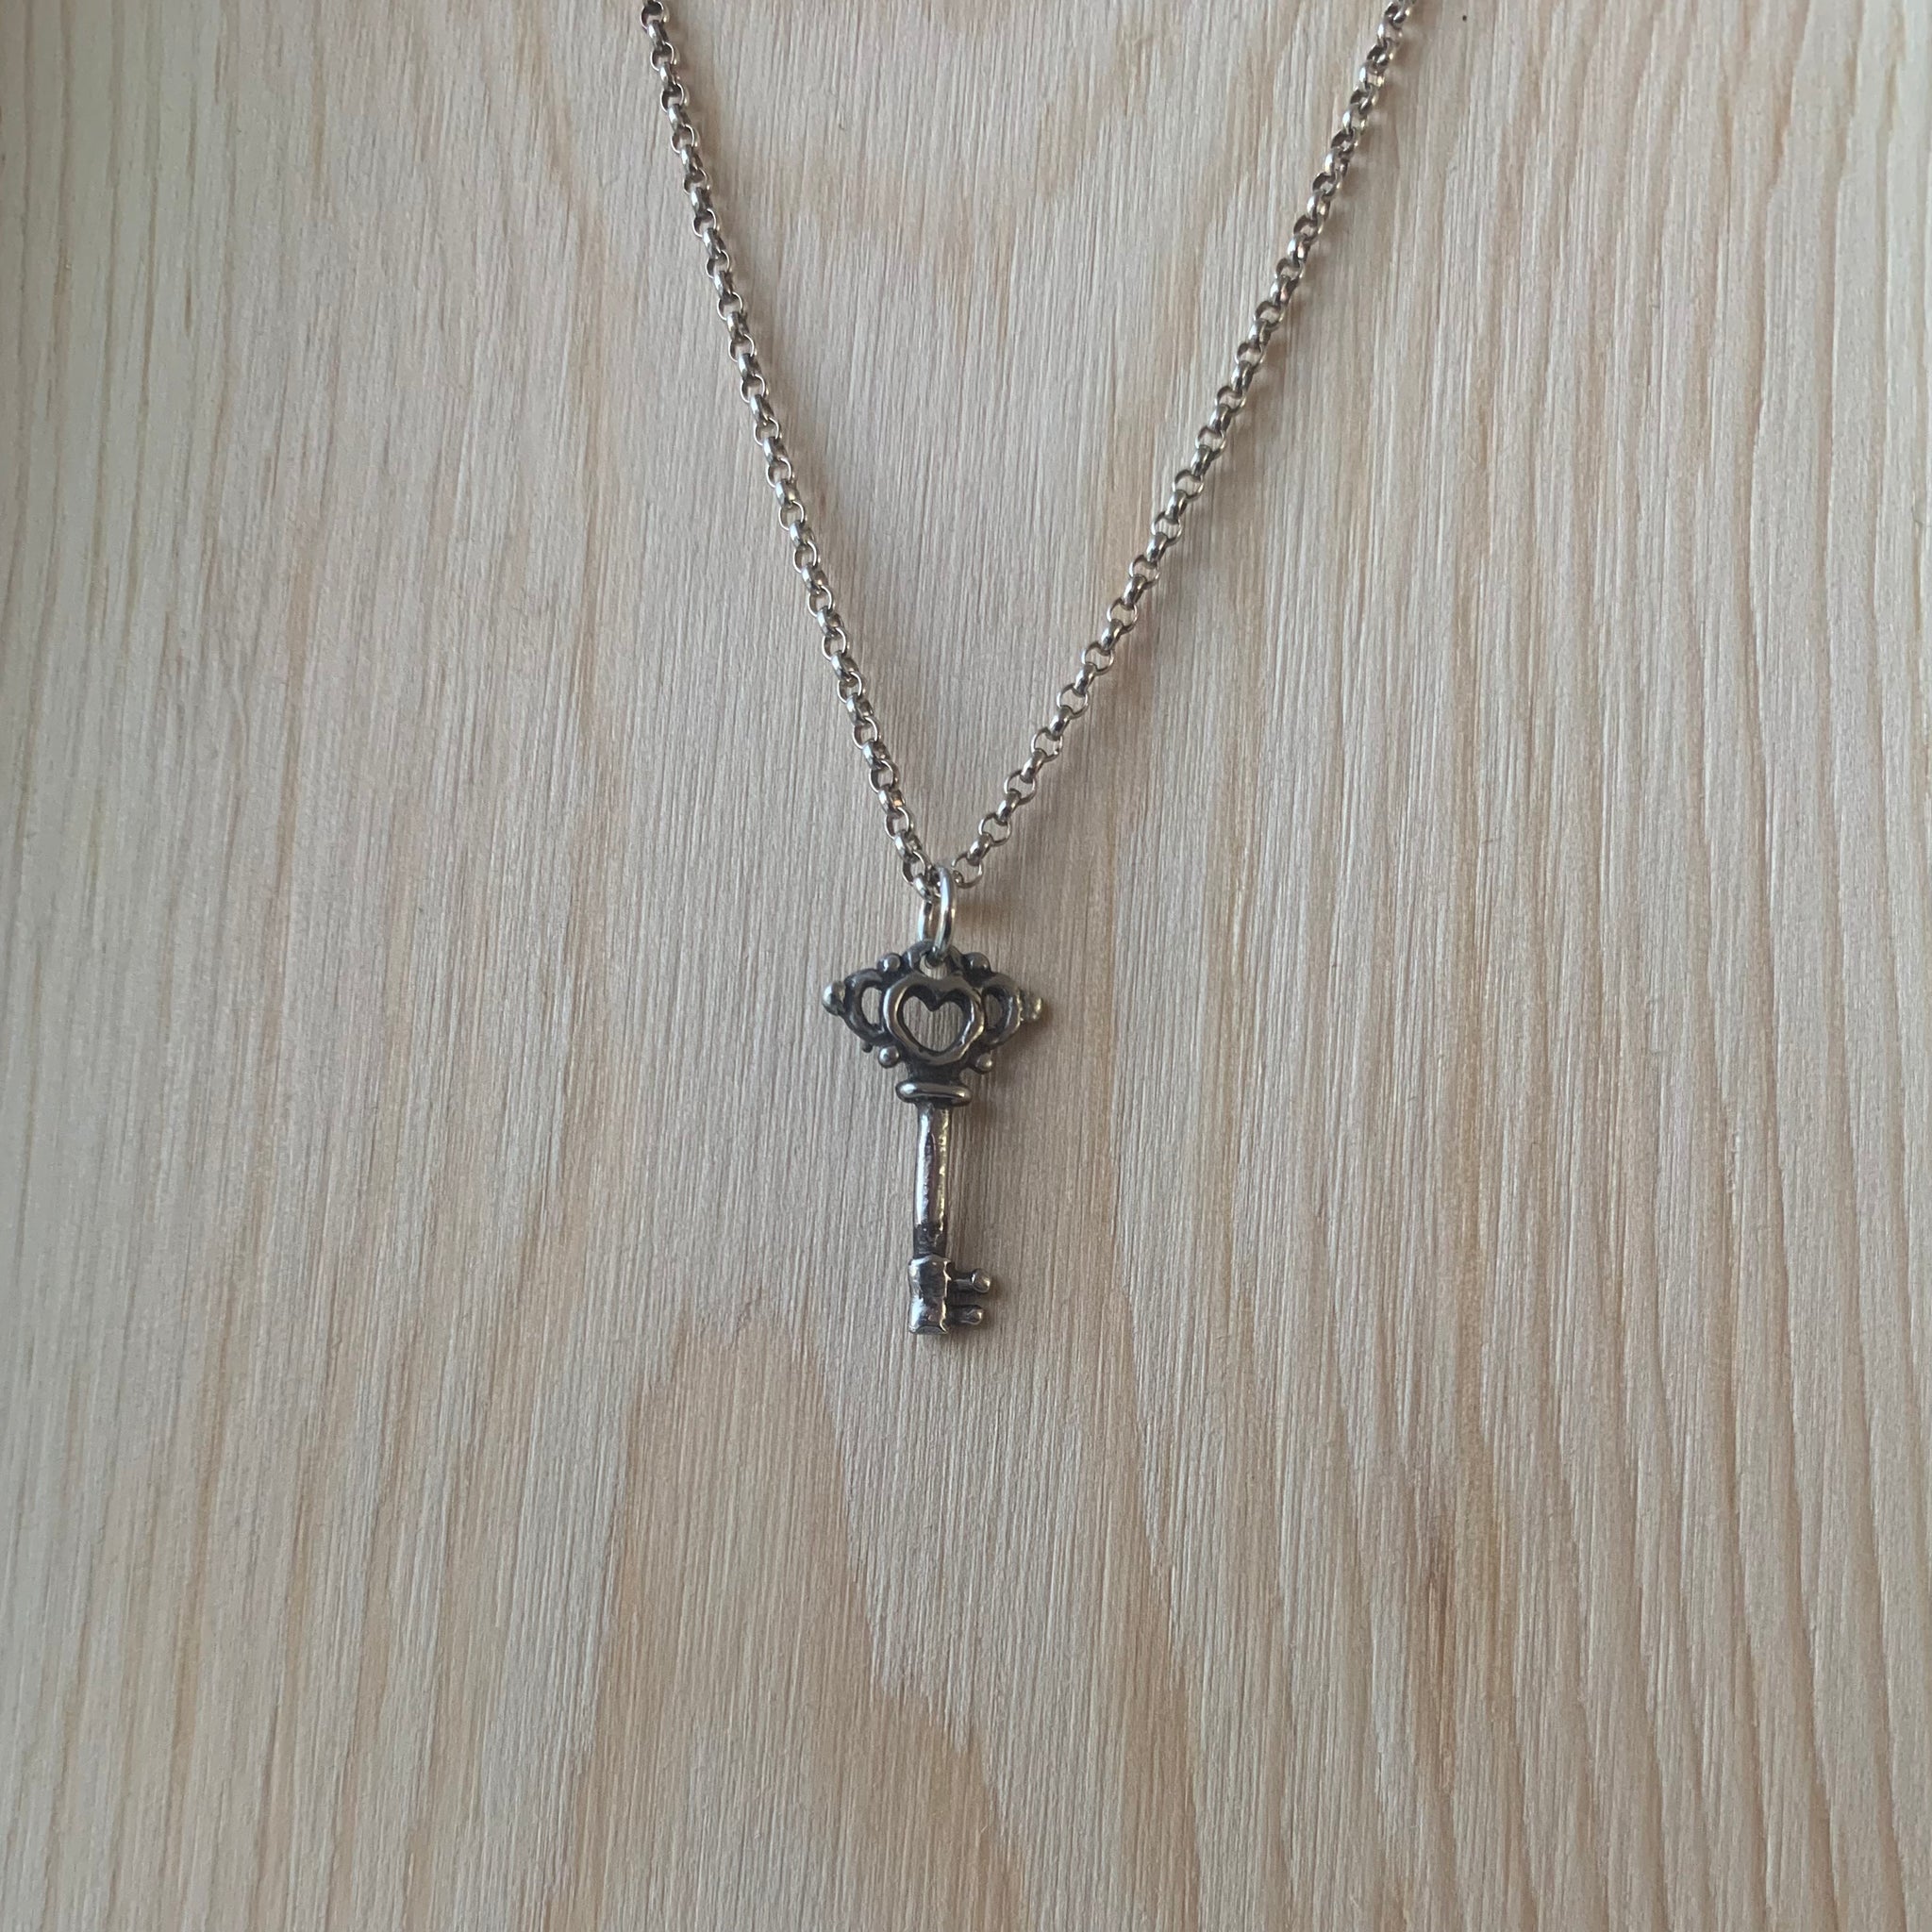 Unmarked Industries Mini Key Necklace